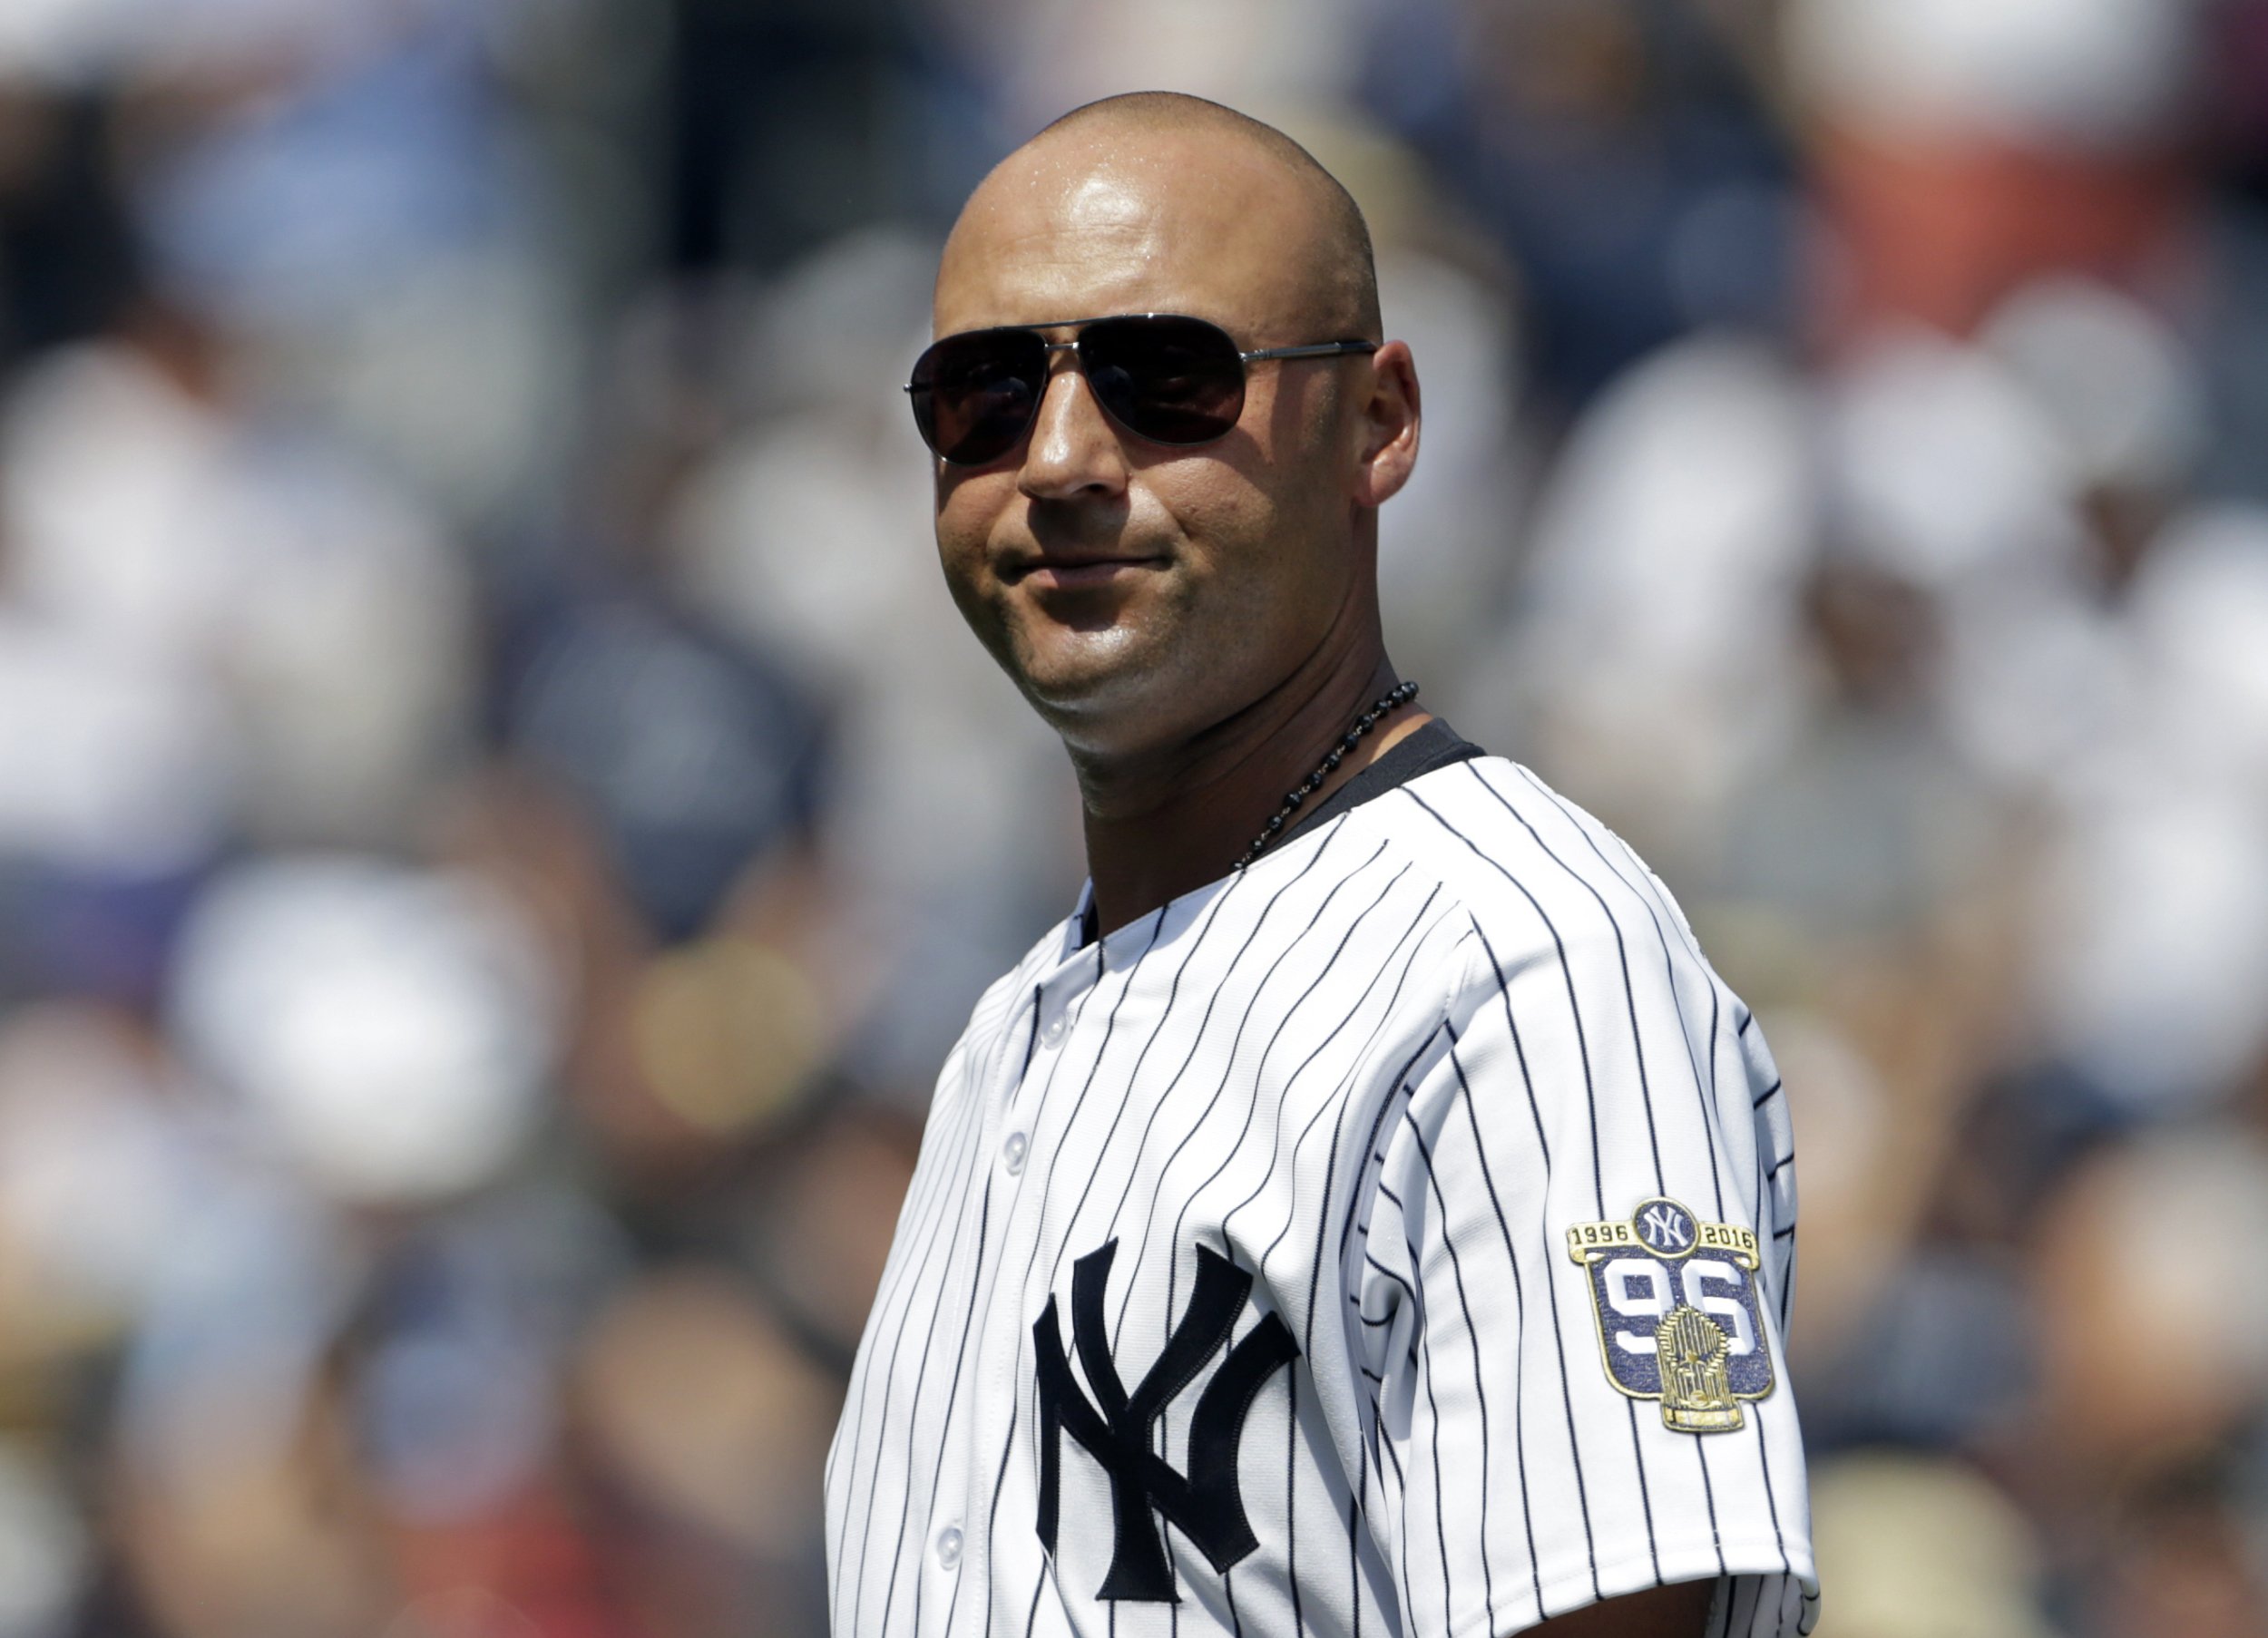 Derek Jeter: Twenty facts, stats and stories you might not know